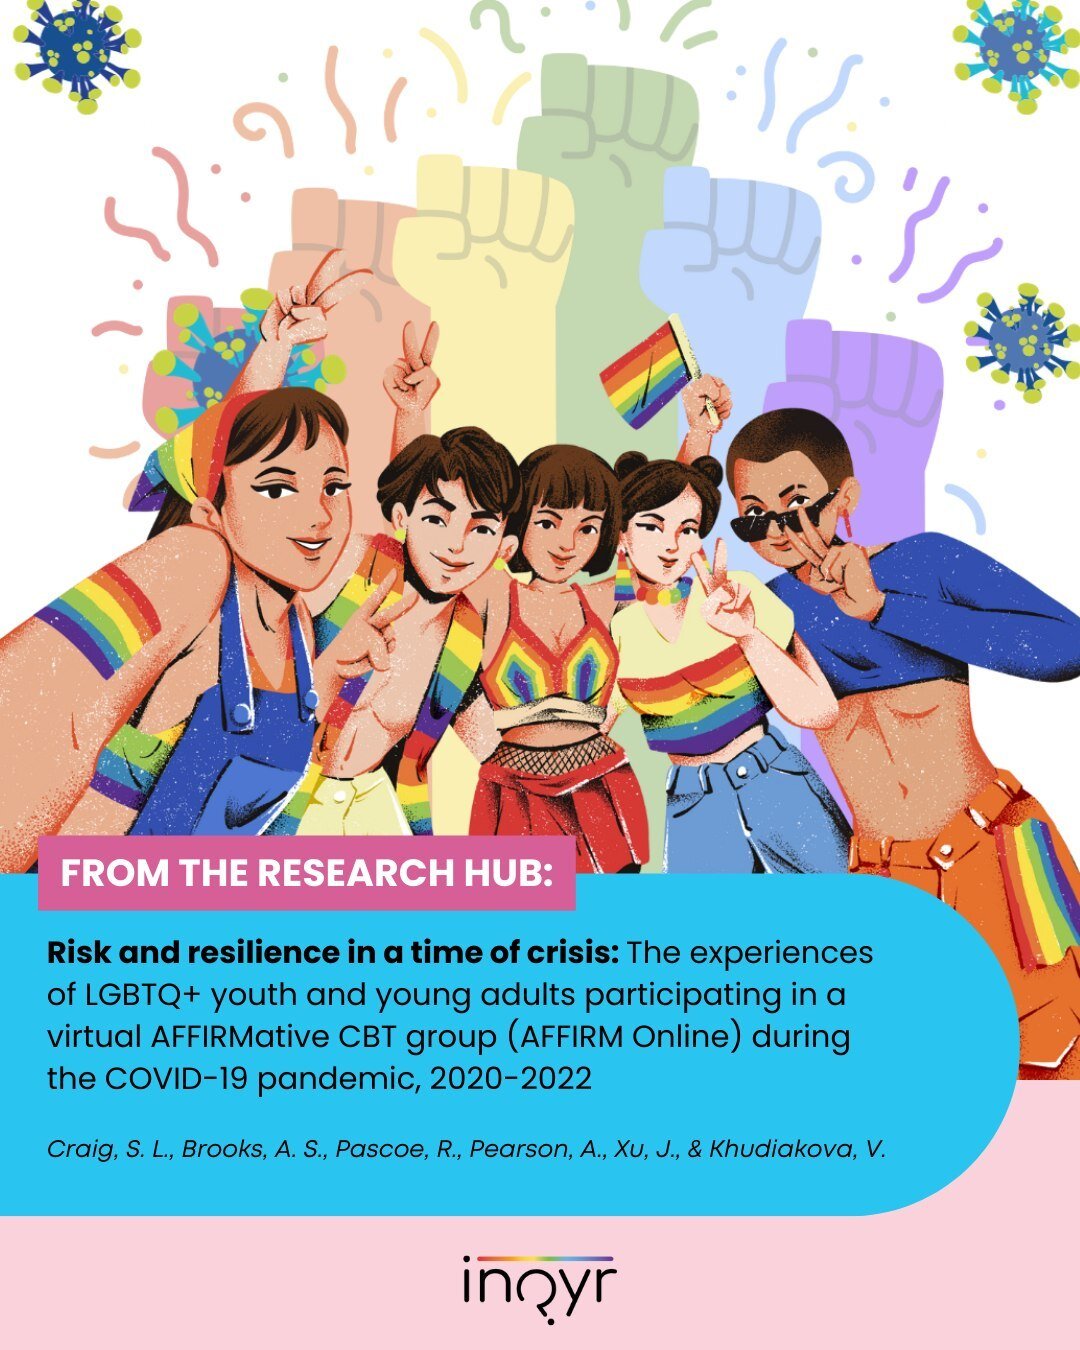 LGBTQ+ youth and young adults are predisposed to mental health challenges due to minority stress, which may have been exacerbated by the pandemic and the lack of access to mental health resources. 

To counter this, clinicians have turned to LGBTQ+ a